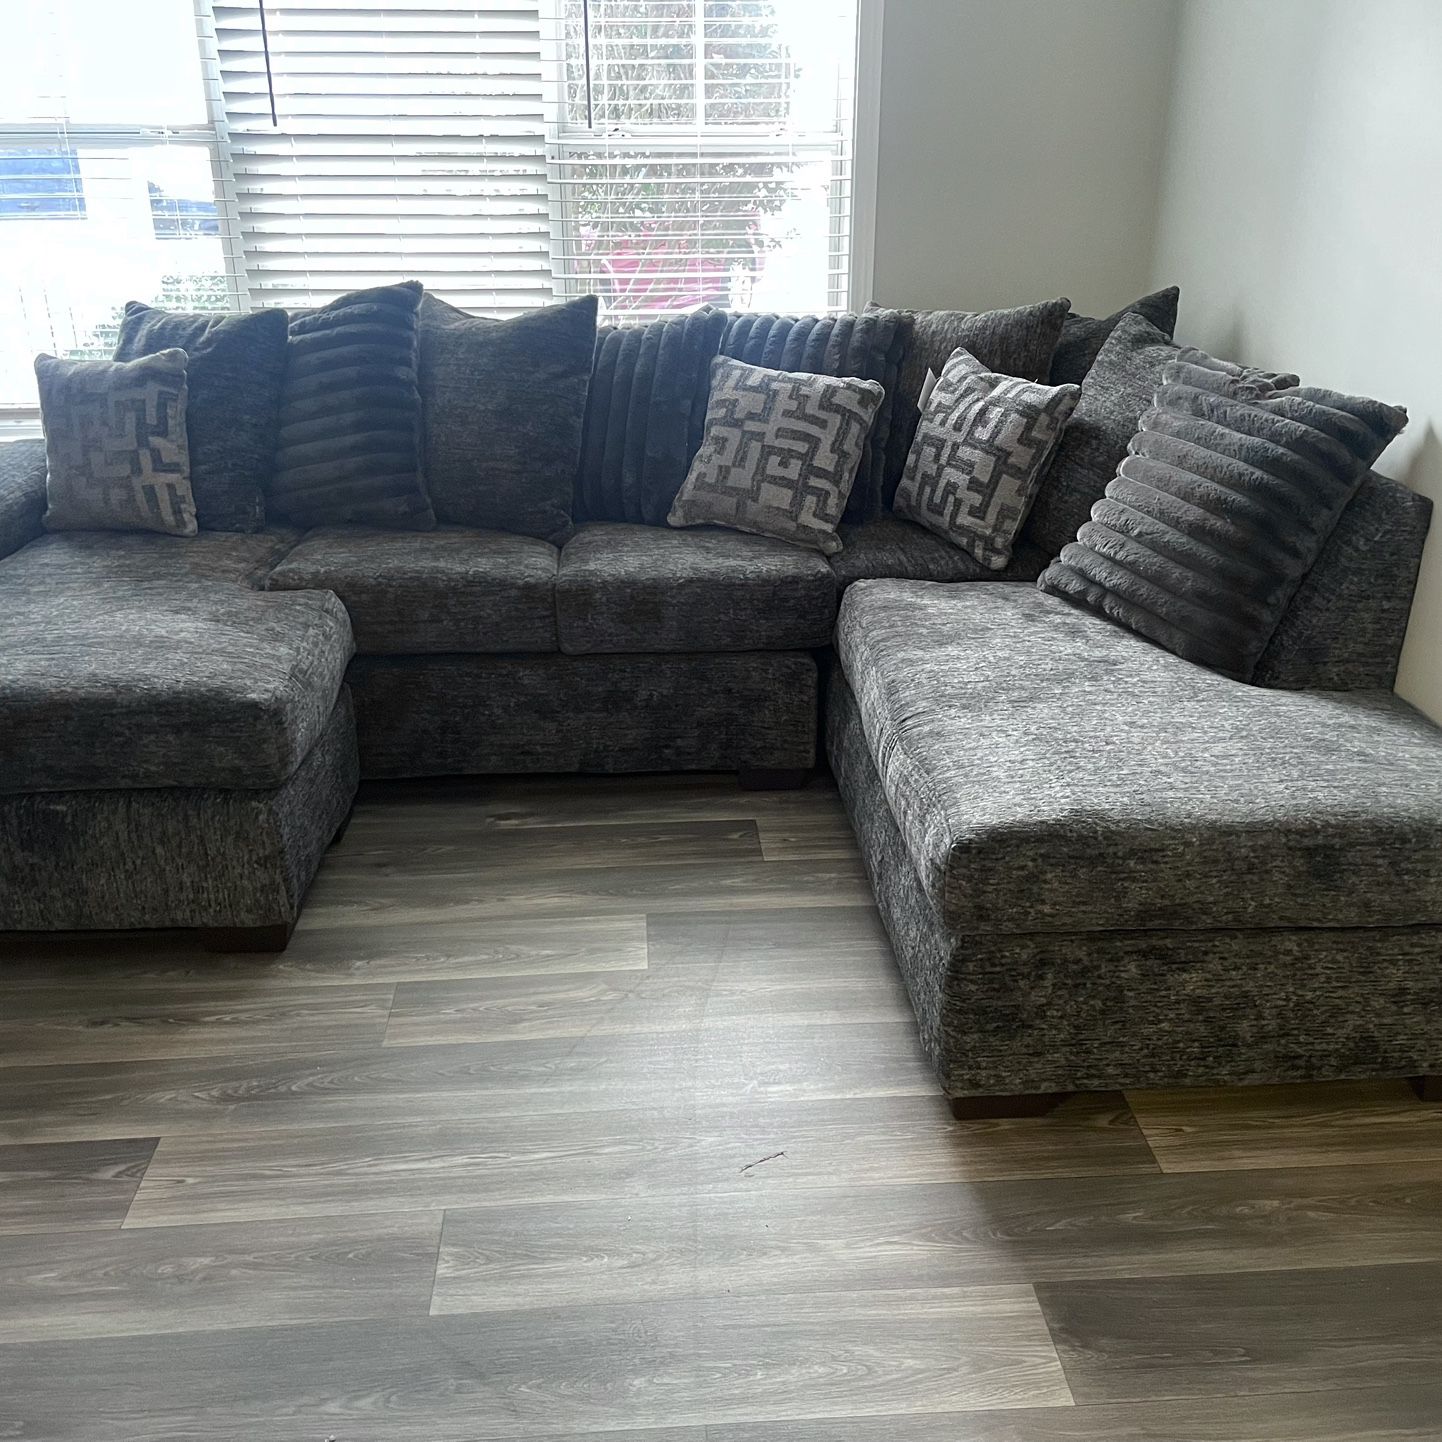  SMOKE GRAY & PEPPER BLACK OVERSIZED SUPER COMFY SECTIONAL WITH 12 THROW PILLOWS!! $975 WITH DELIVERY!!